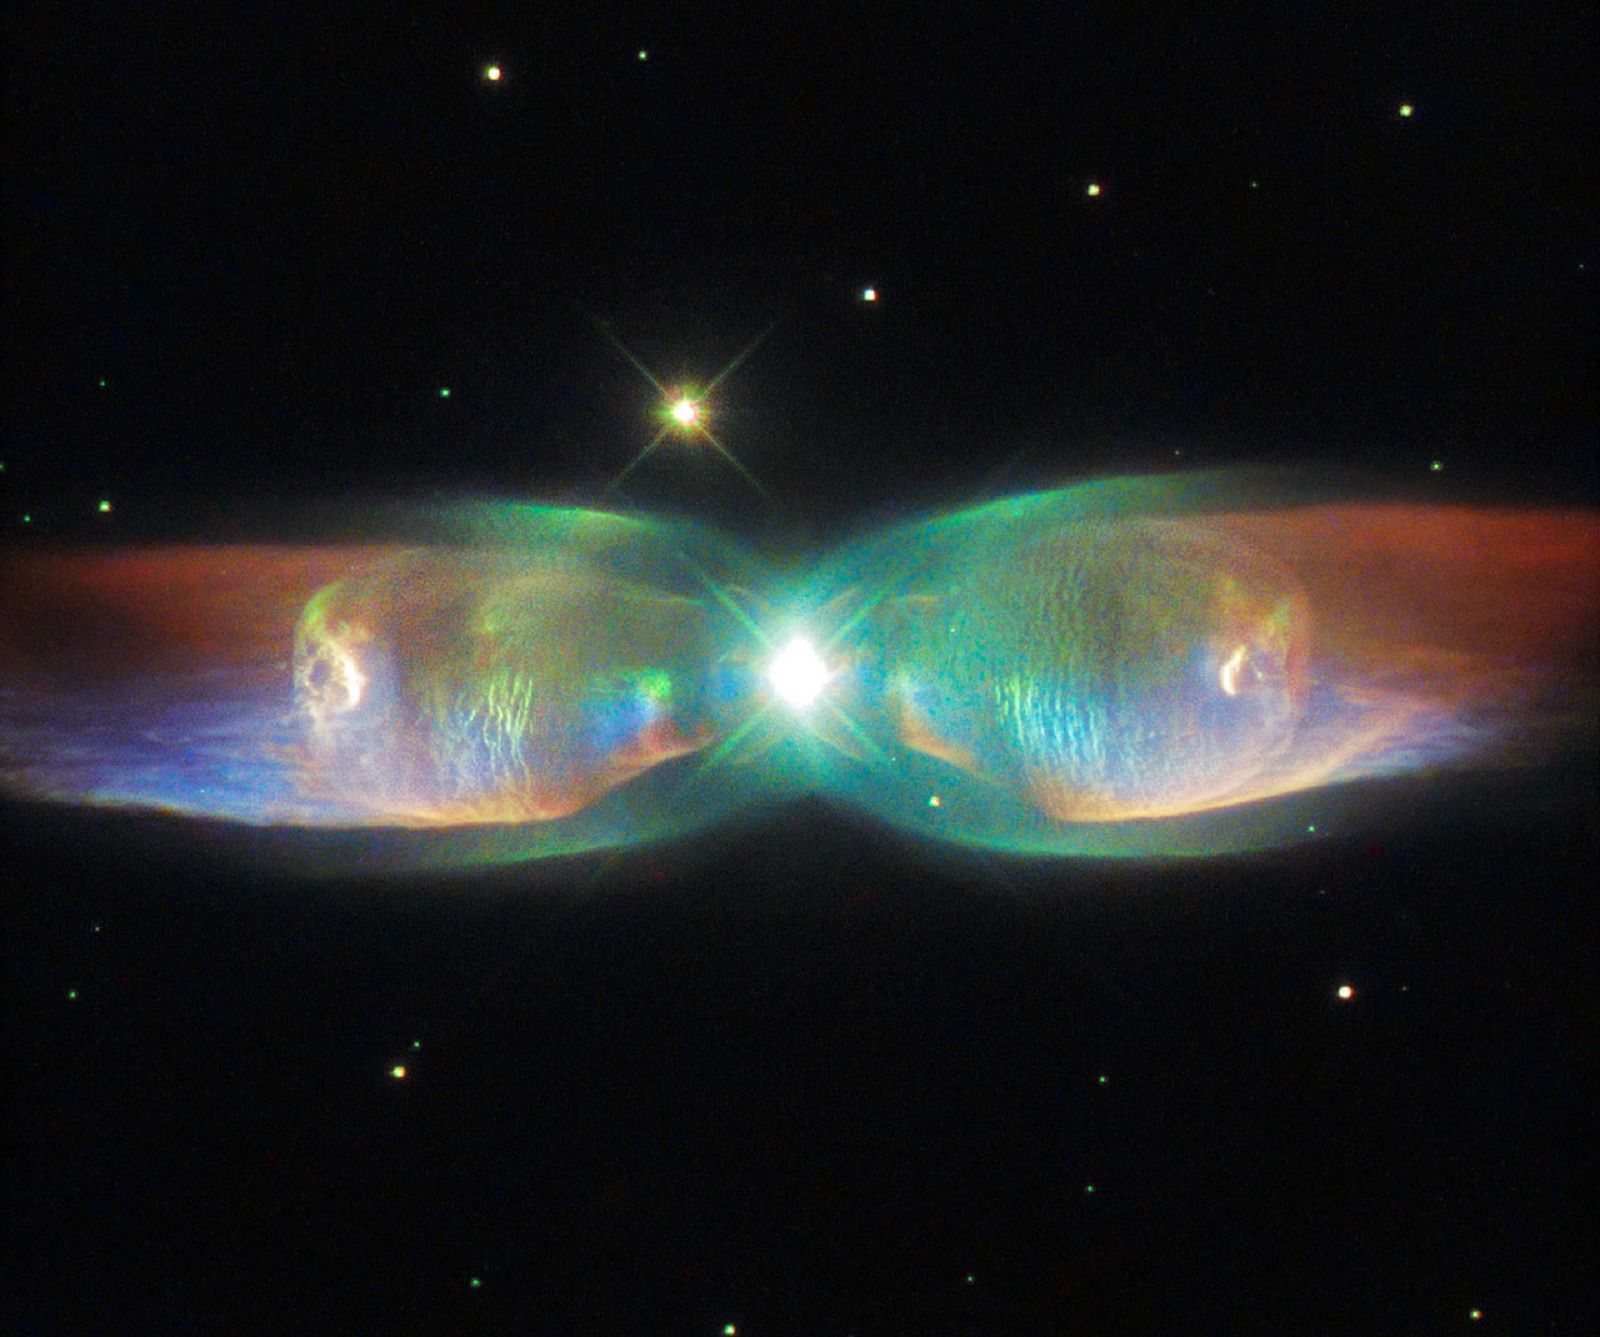 astounding images from the depths of the universe courtesy of the hubble space telescope photo 32